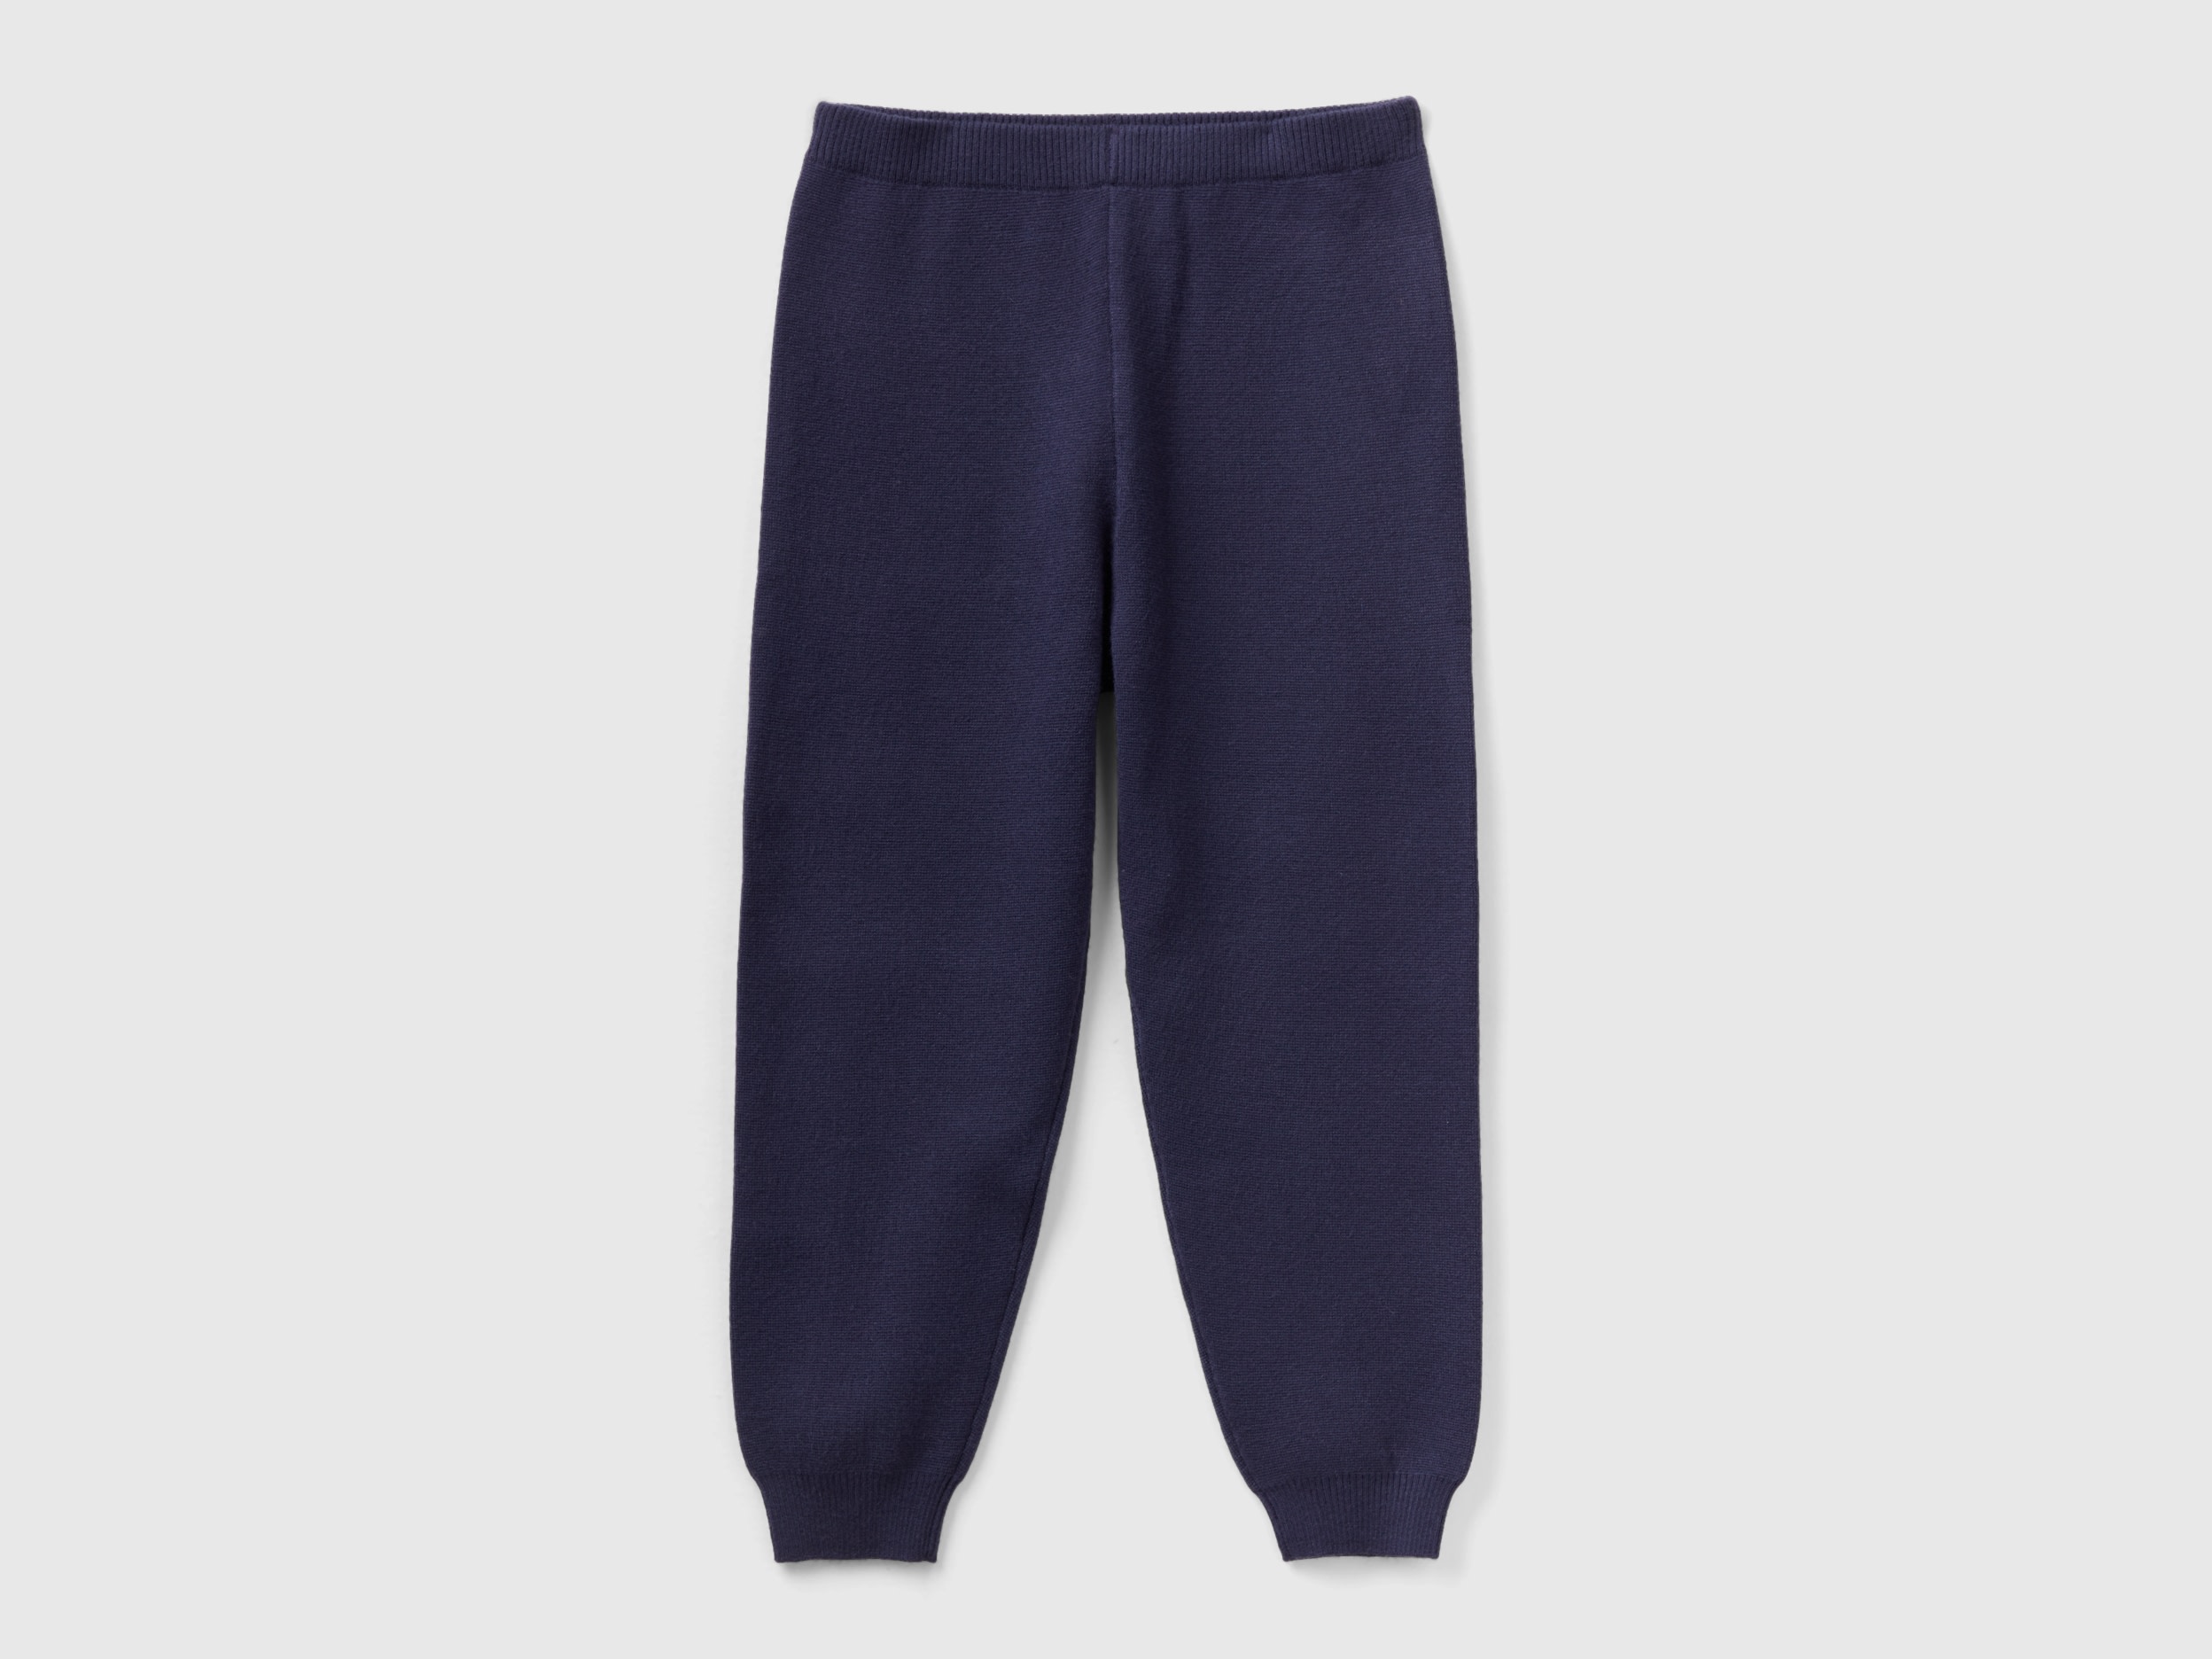 Benetton, Knit Trousers With Drawstring, size S, Dark Blue, Kids